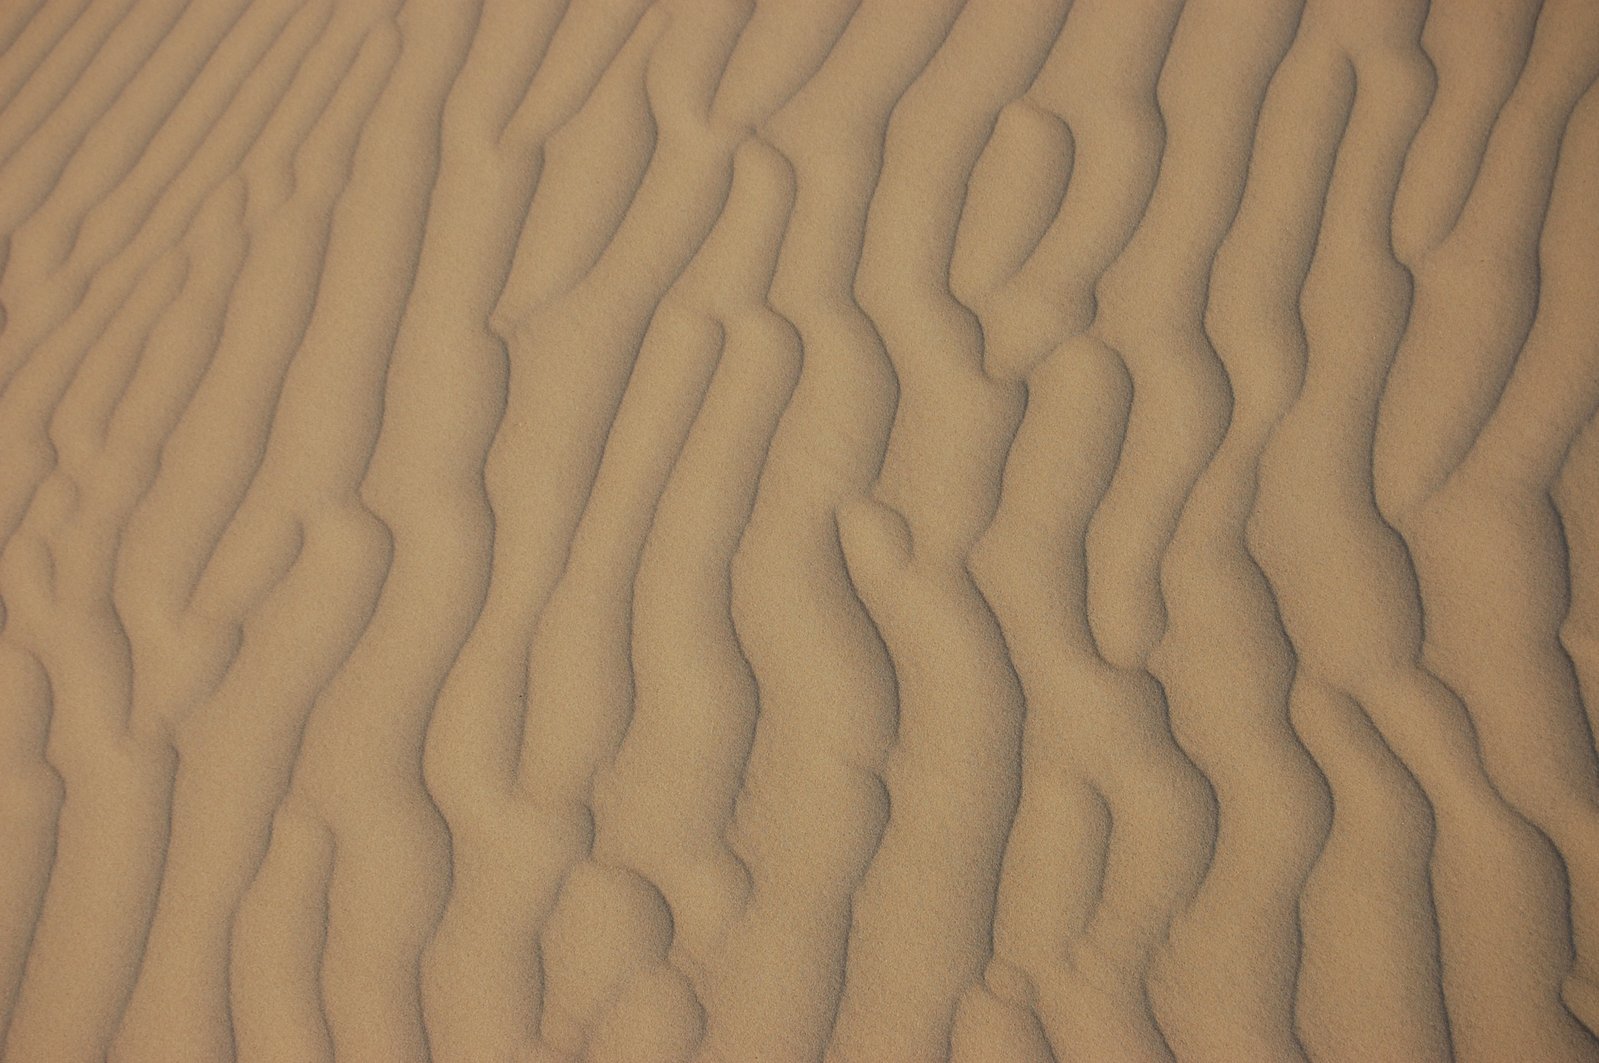 a textured sandy surface with ridges in the sand